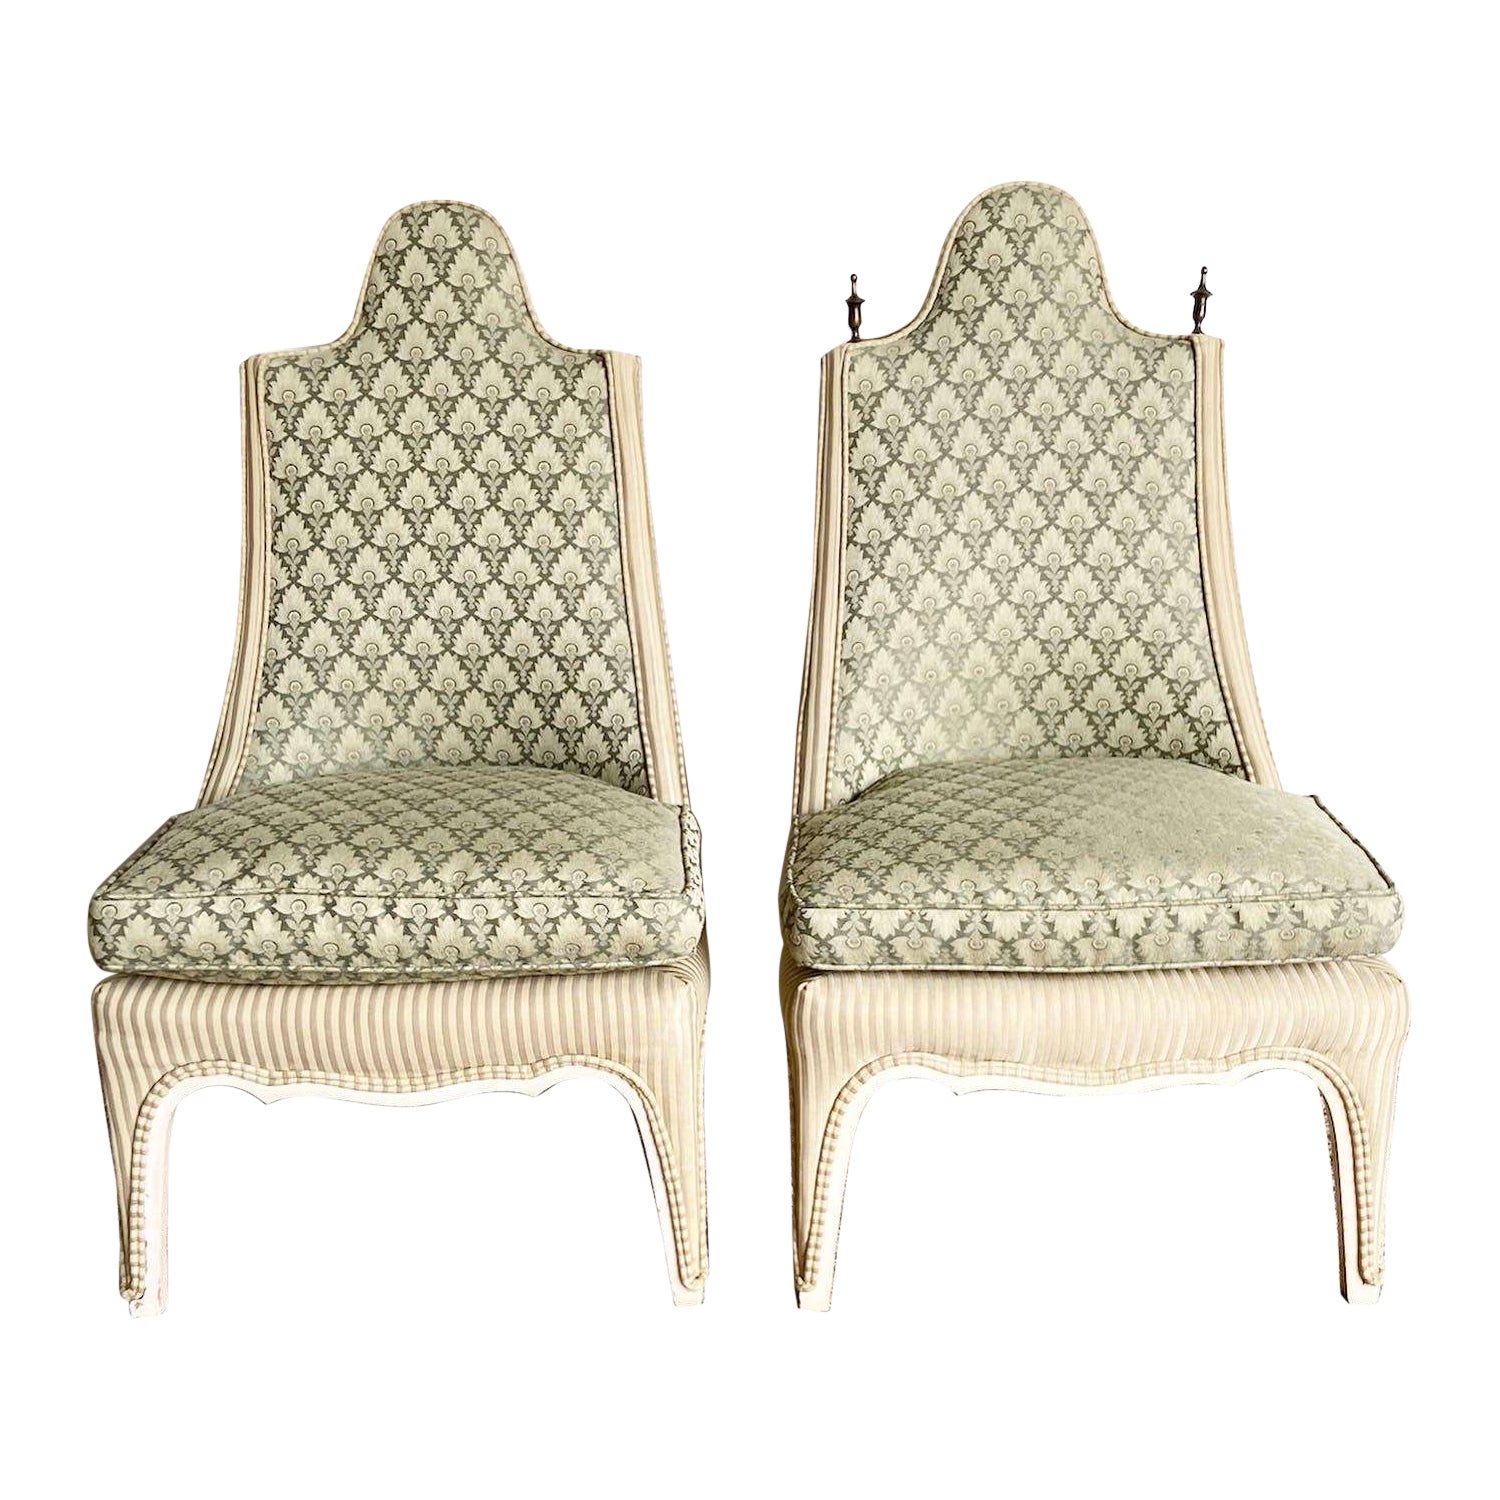 Regency Green and Tan Accent Chairs - a Pair